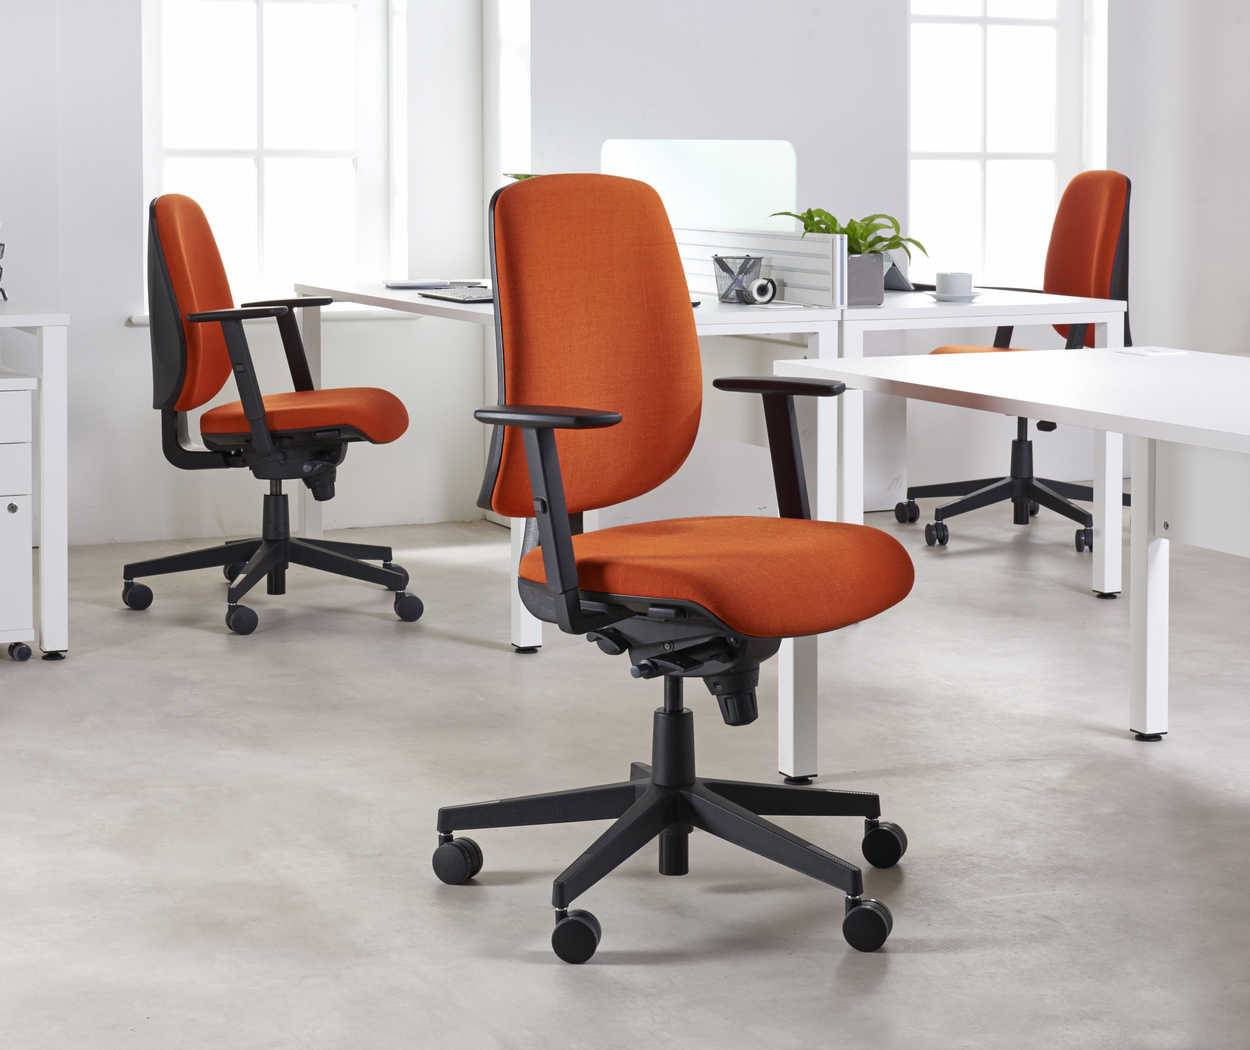 Nomique-Tally-Task-Chair-10.jpg